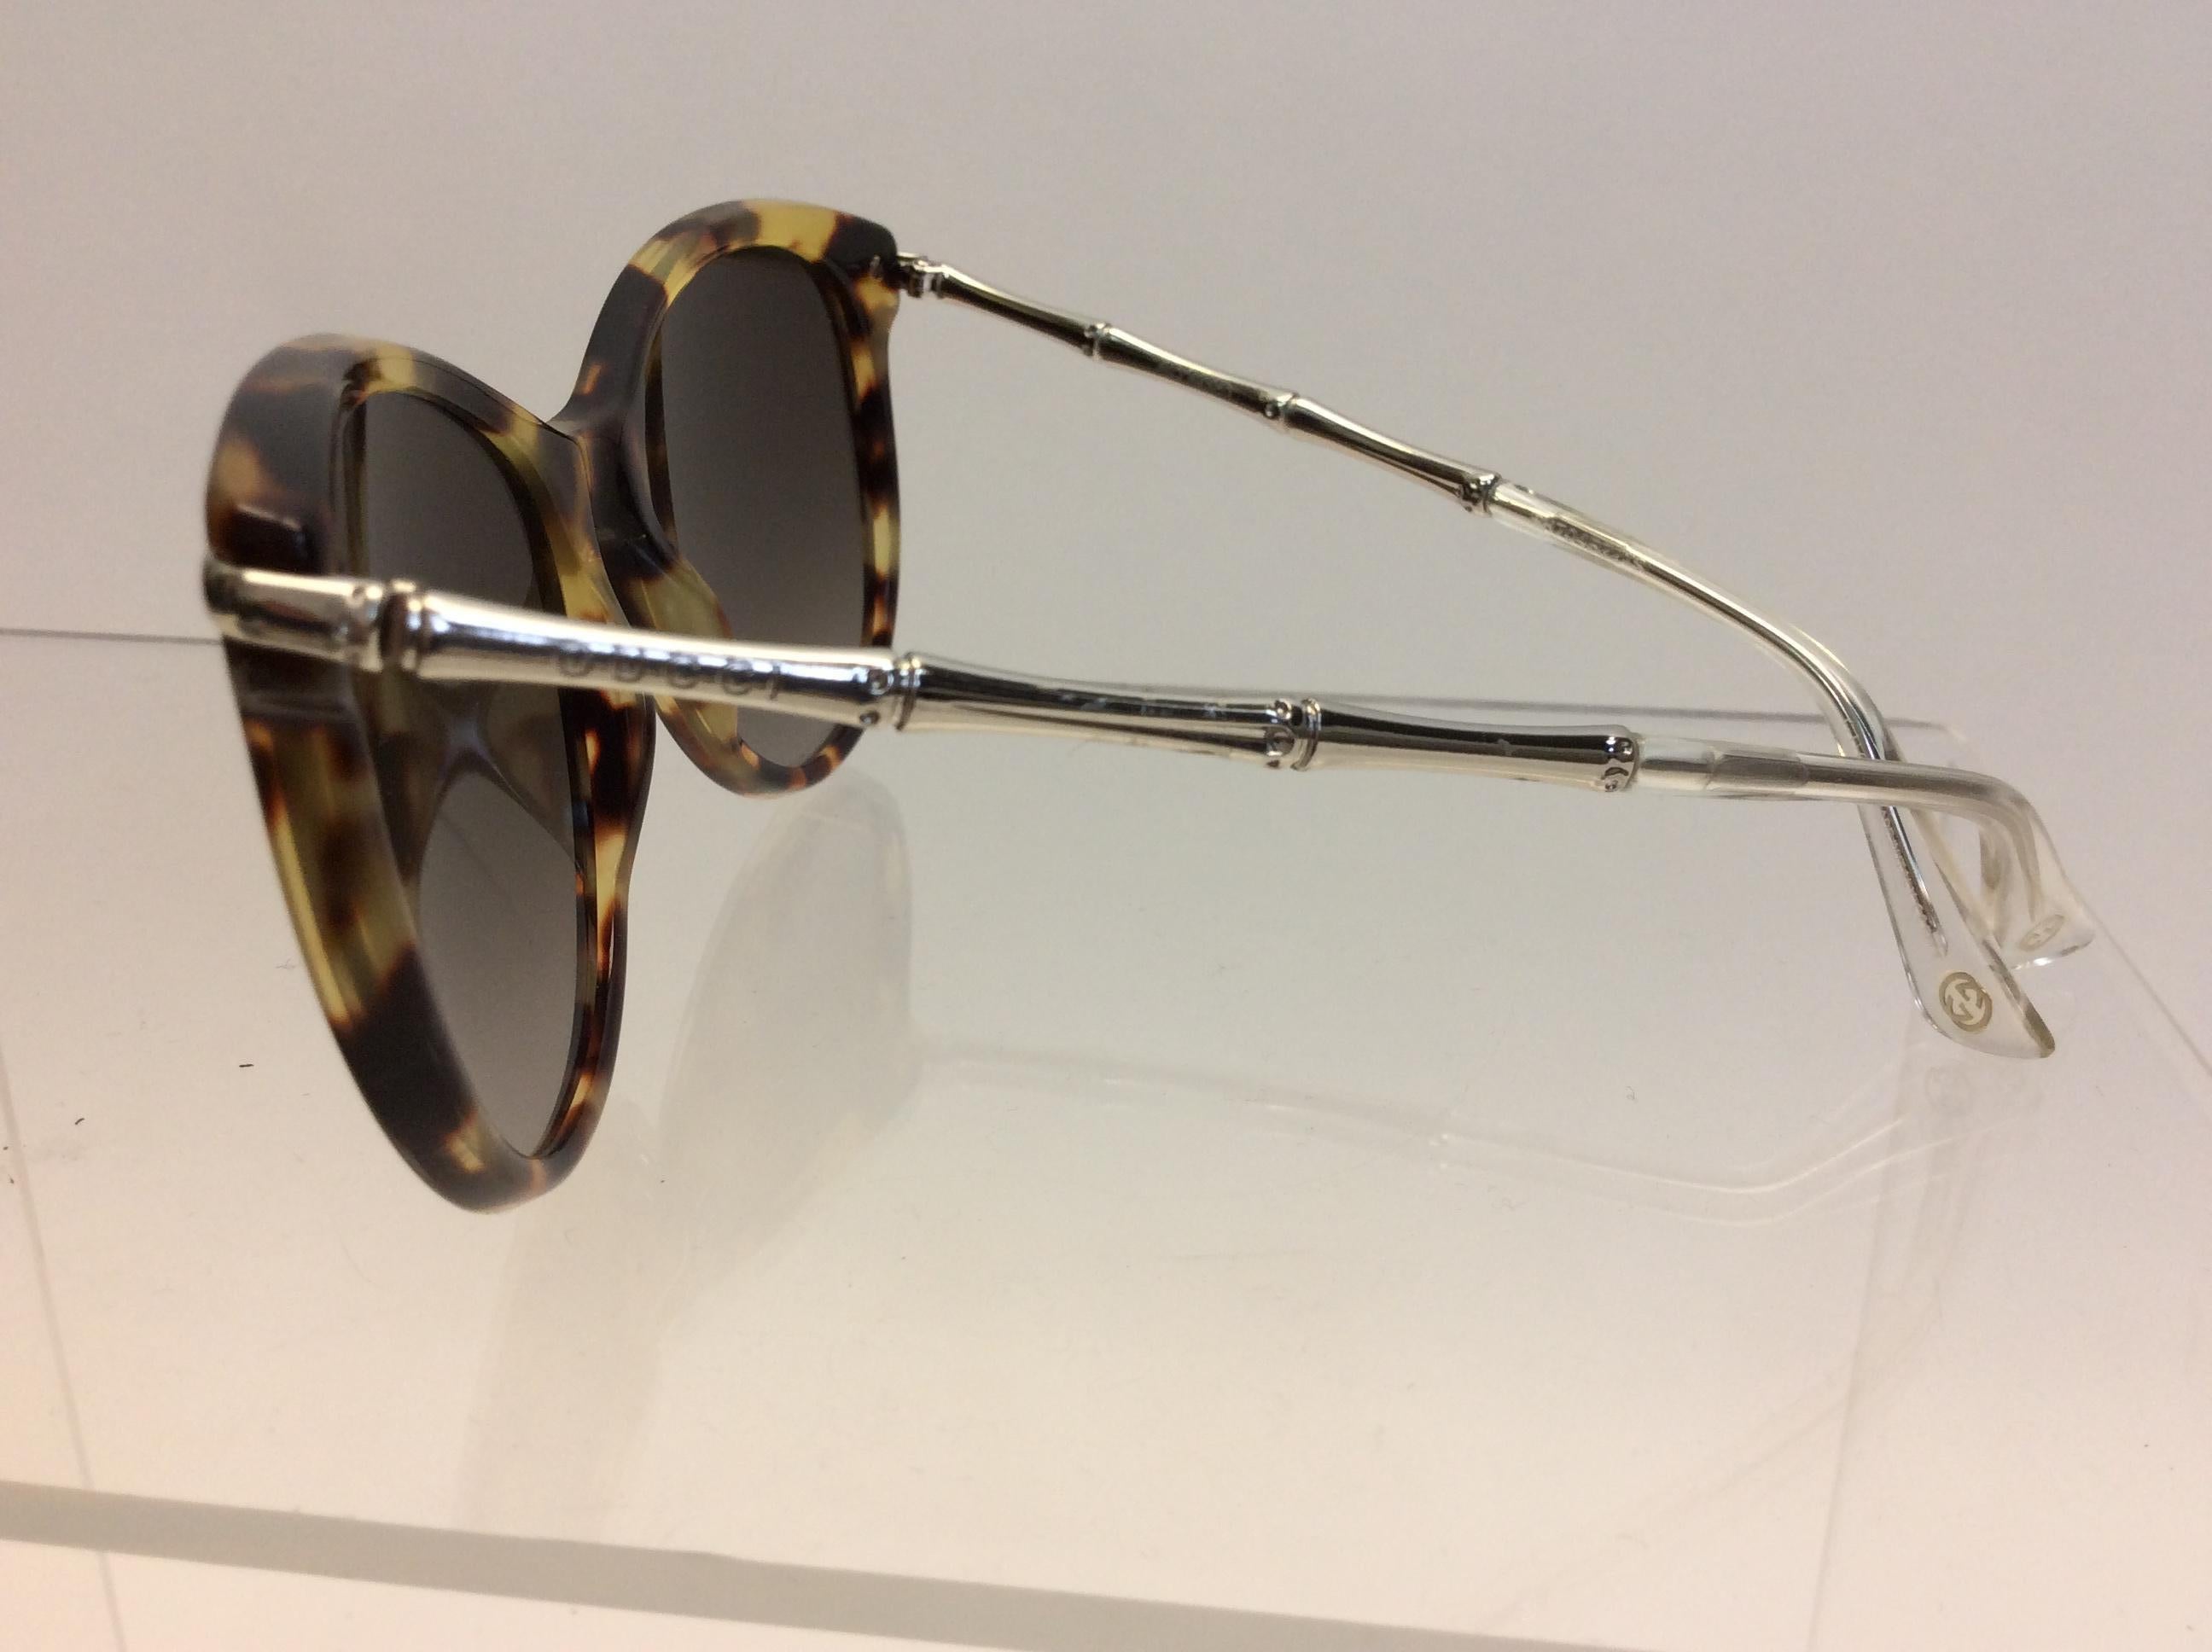 Gucci Tortoise and Silver Sunglasses
$199
Made in Italy
Across 5.5